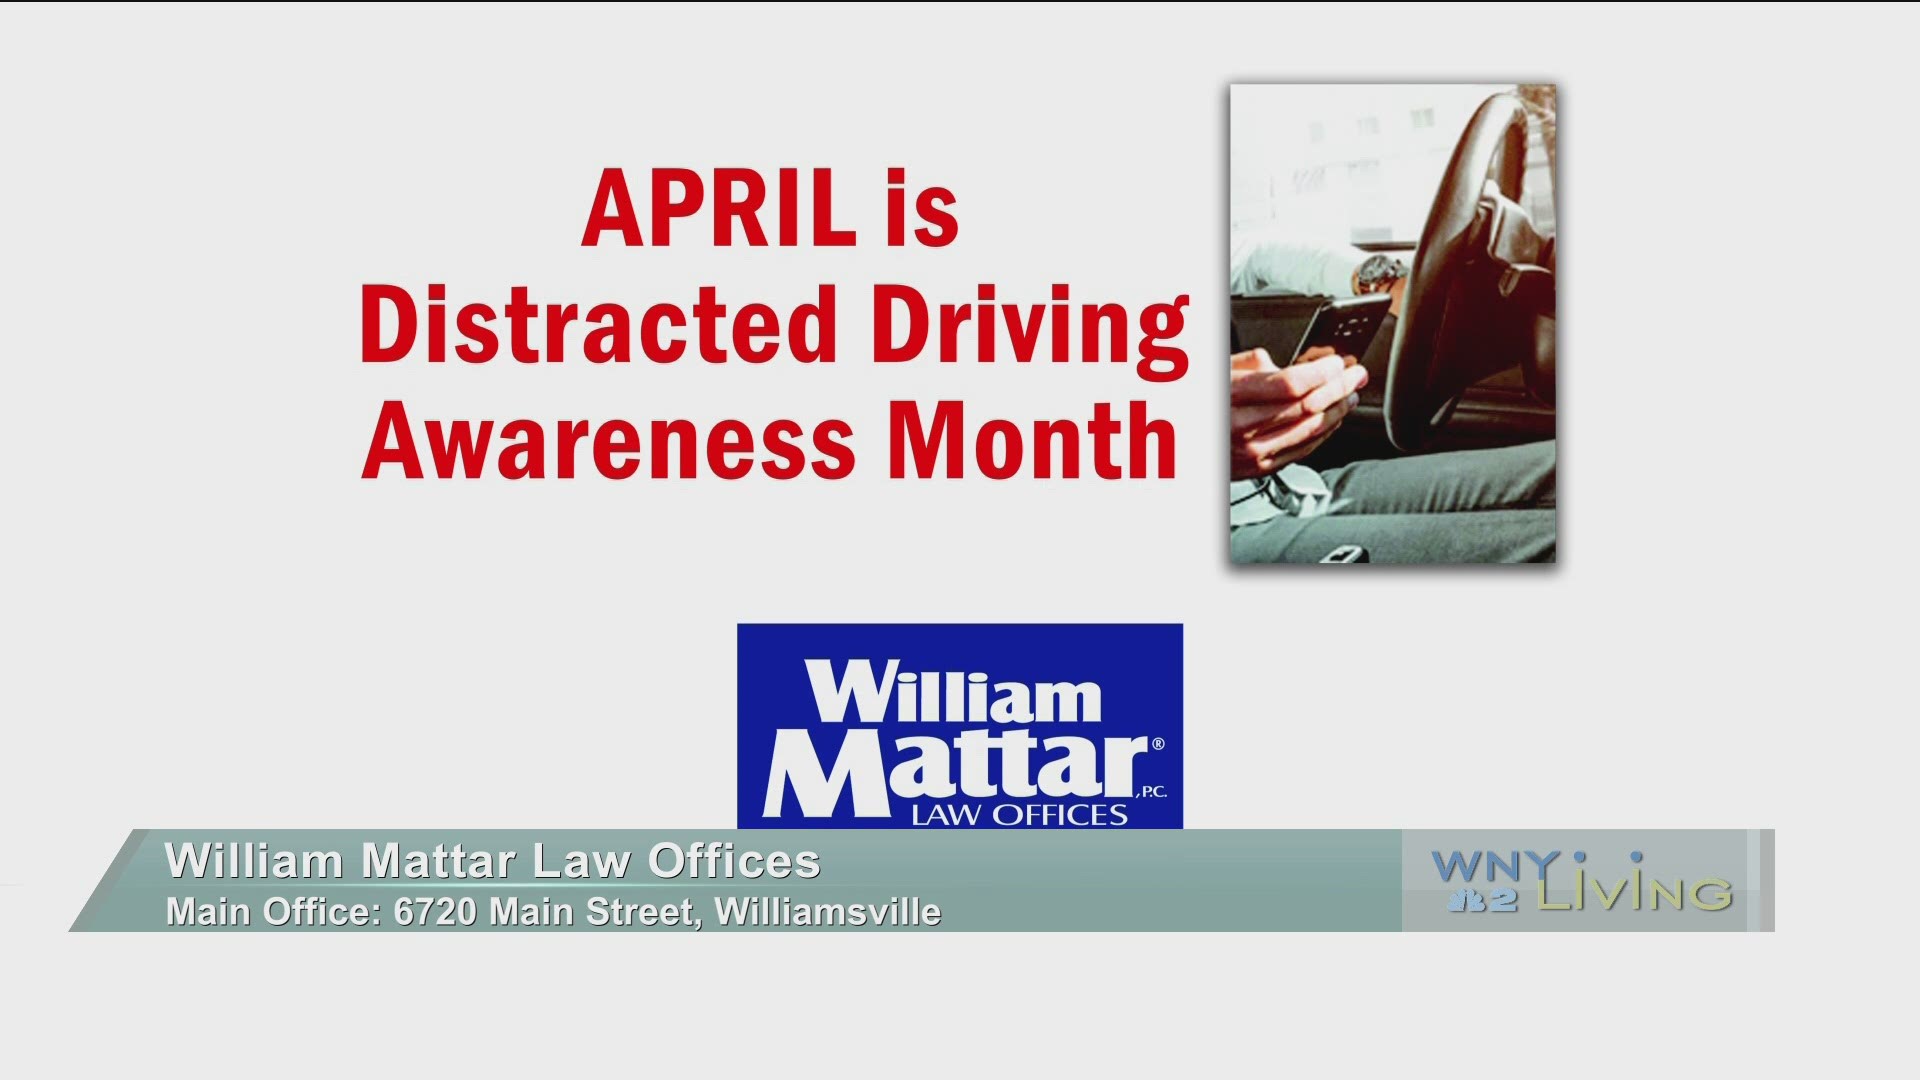 WNY Living - April 3 - William Mattar Law Offices (THIS VIDEO IS SPONSORED BY WILLIAM MATTAR LAW OFFICES)